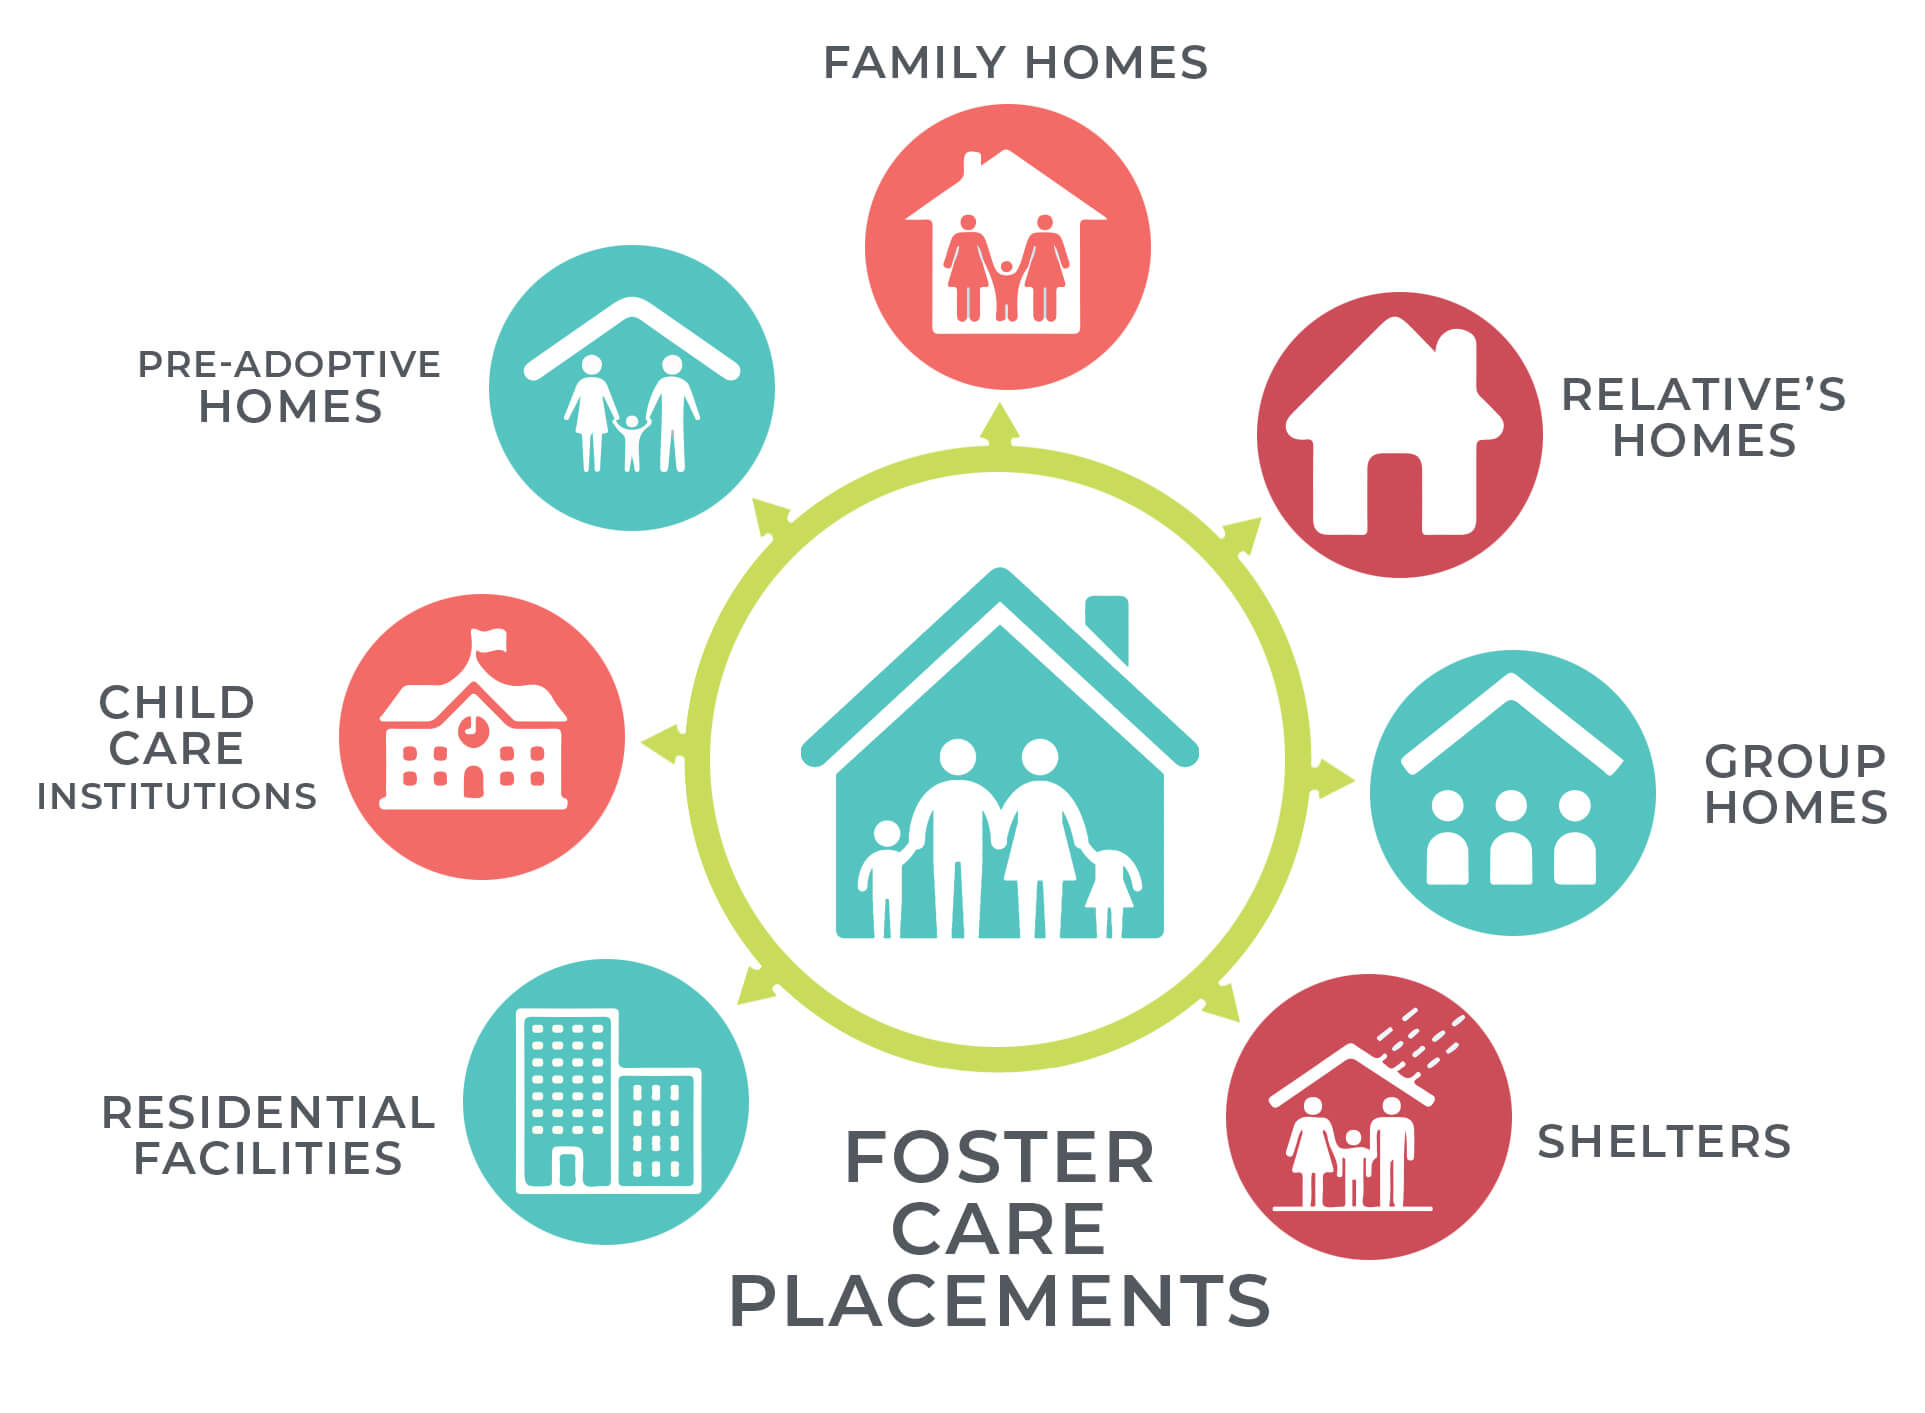 What is Foster Care? American SPCC